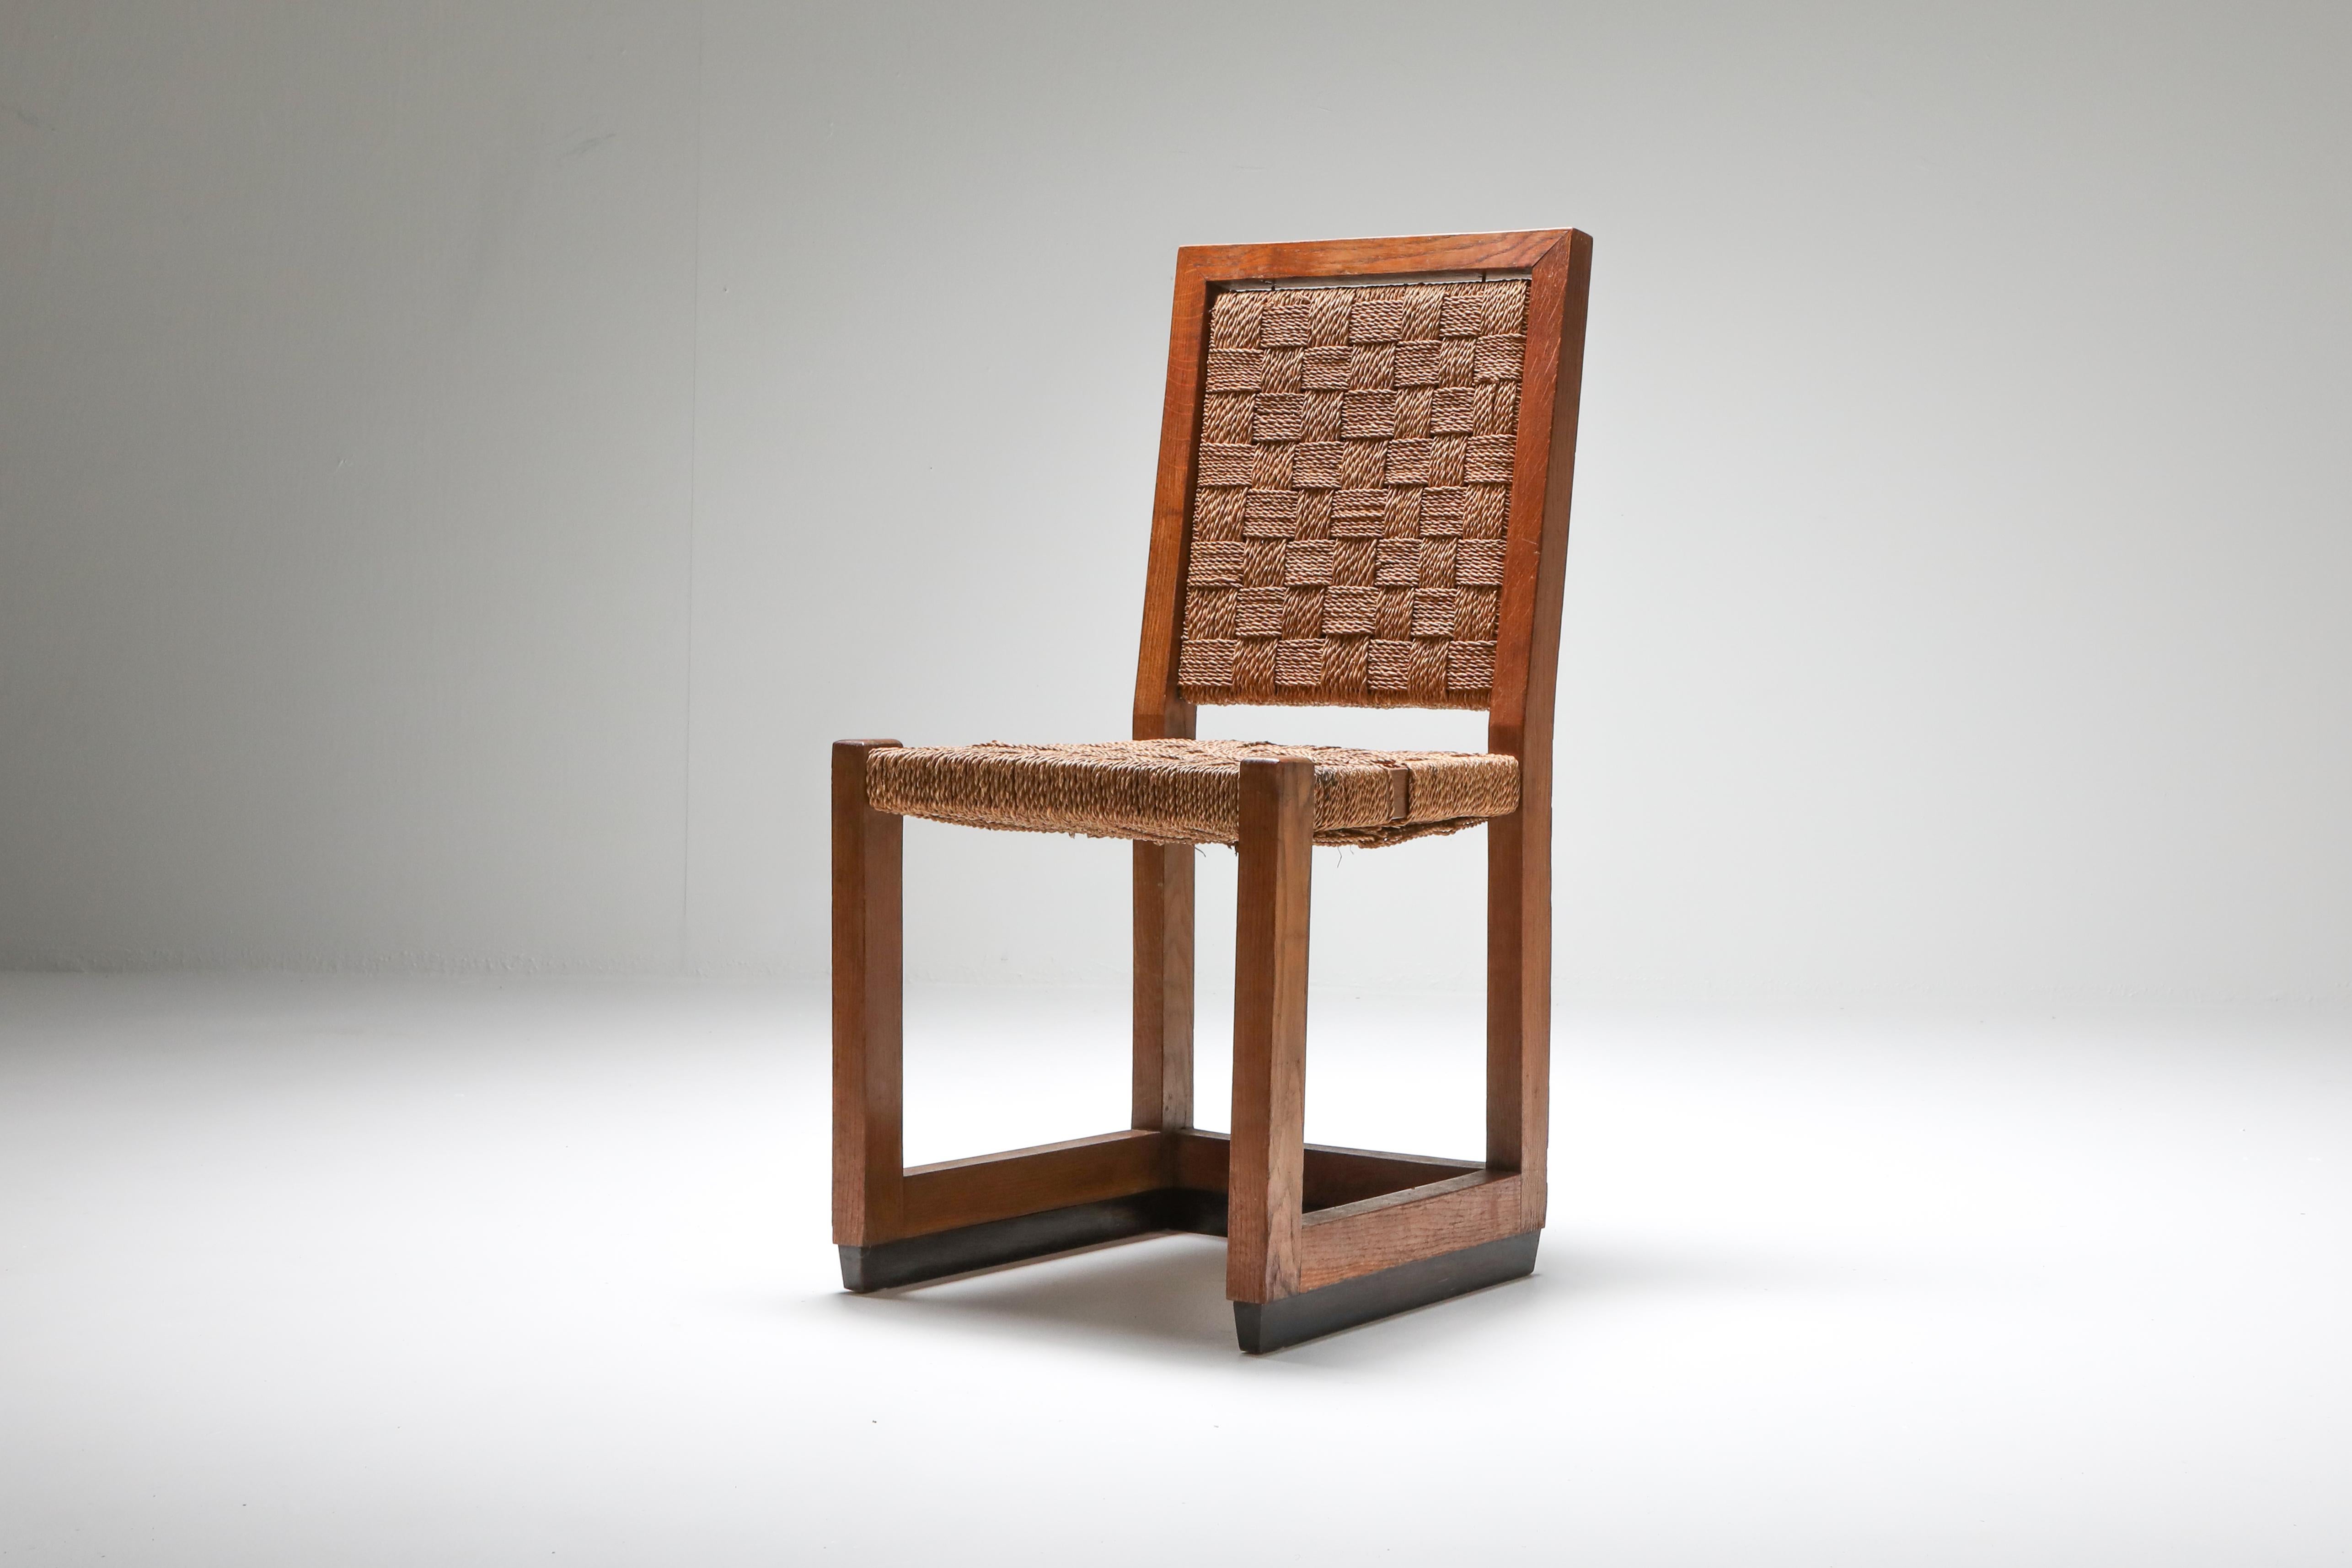 Art Deco era chair from The Netherlands, Hague School, 1920

A minimalist pre-modernist piece from solid oak with cord seating.
Would fit well in a rustic modern, wabi-sabi interior inspired by Axel Vervoordt.
  